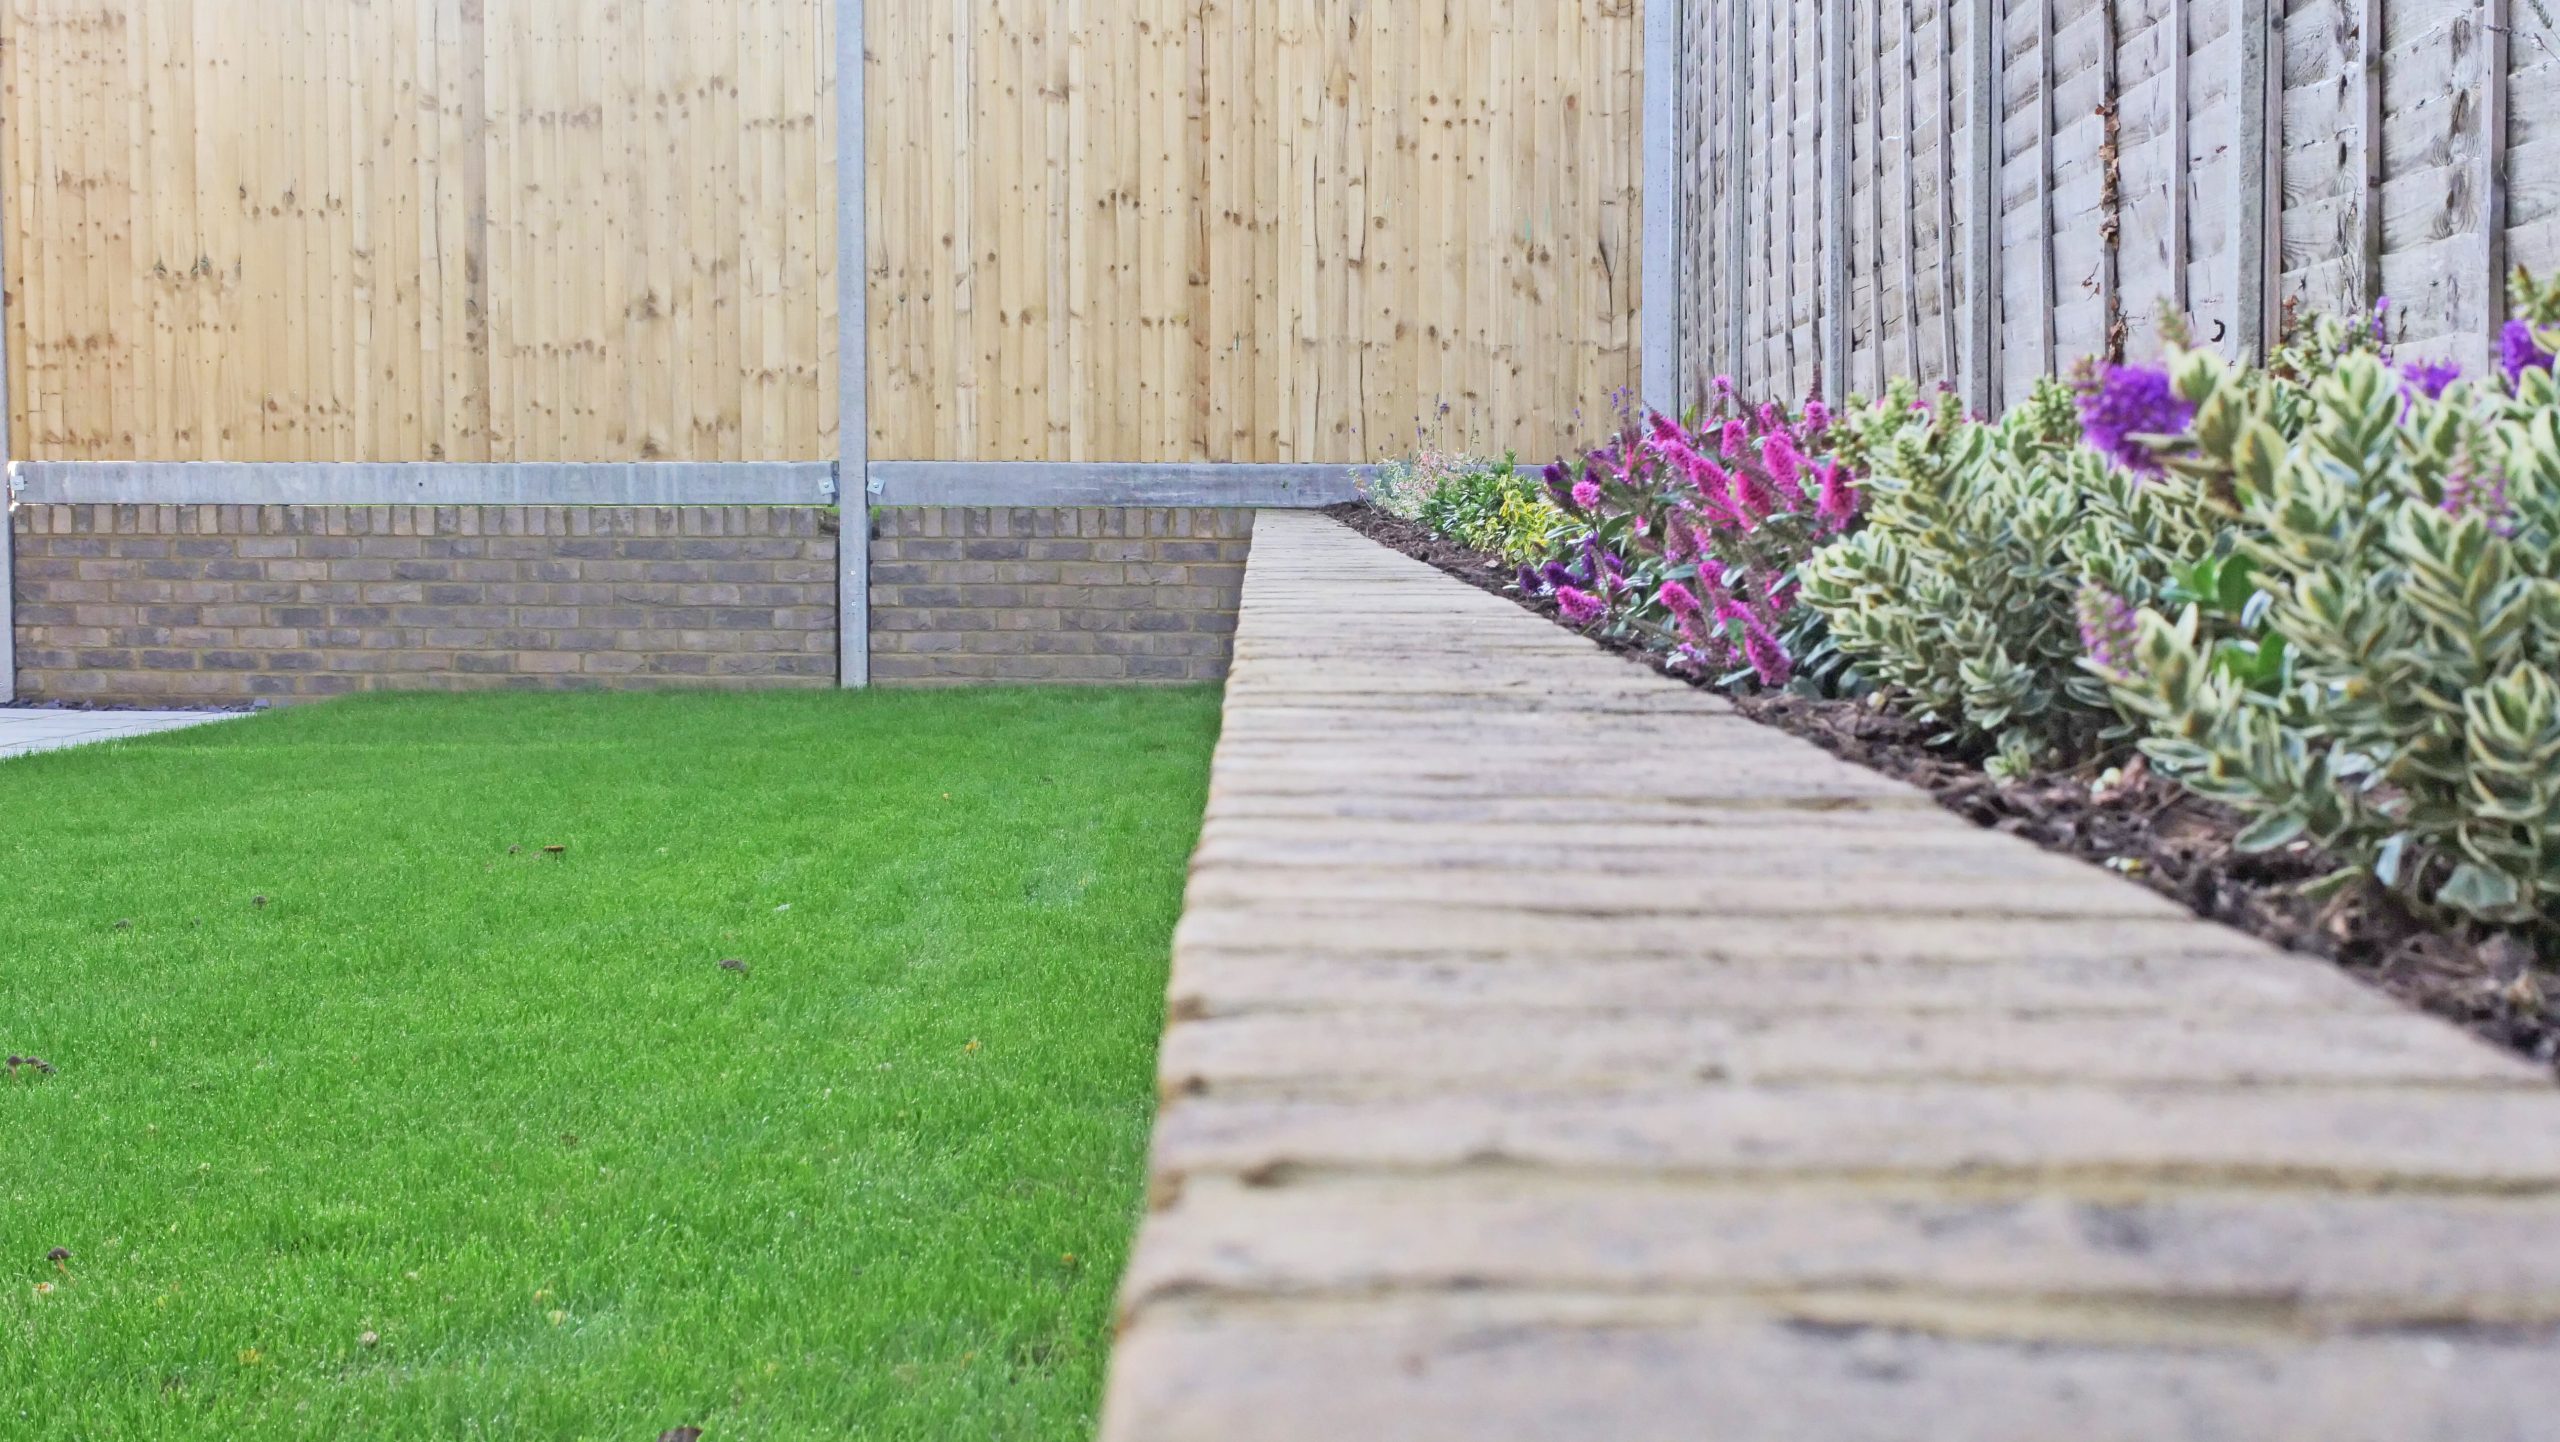 A new build bungalow garden at our Churchfields development, with grass and flower beds next to surrounding fences.